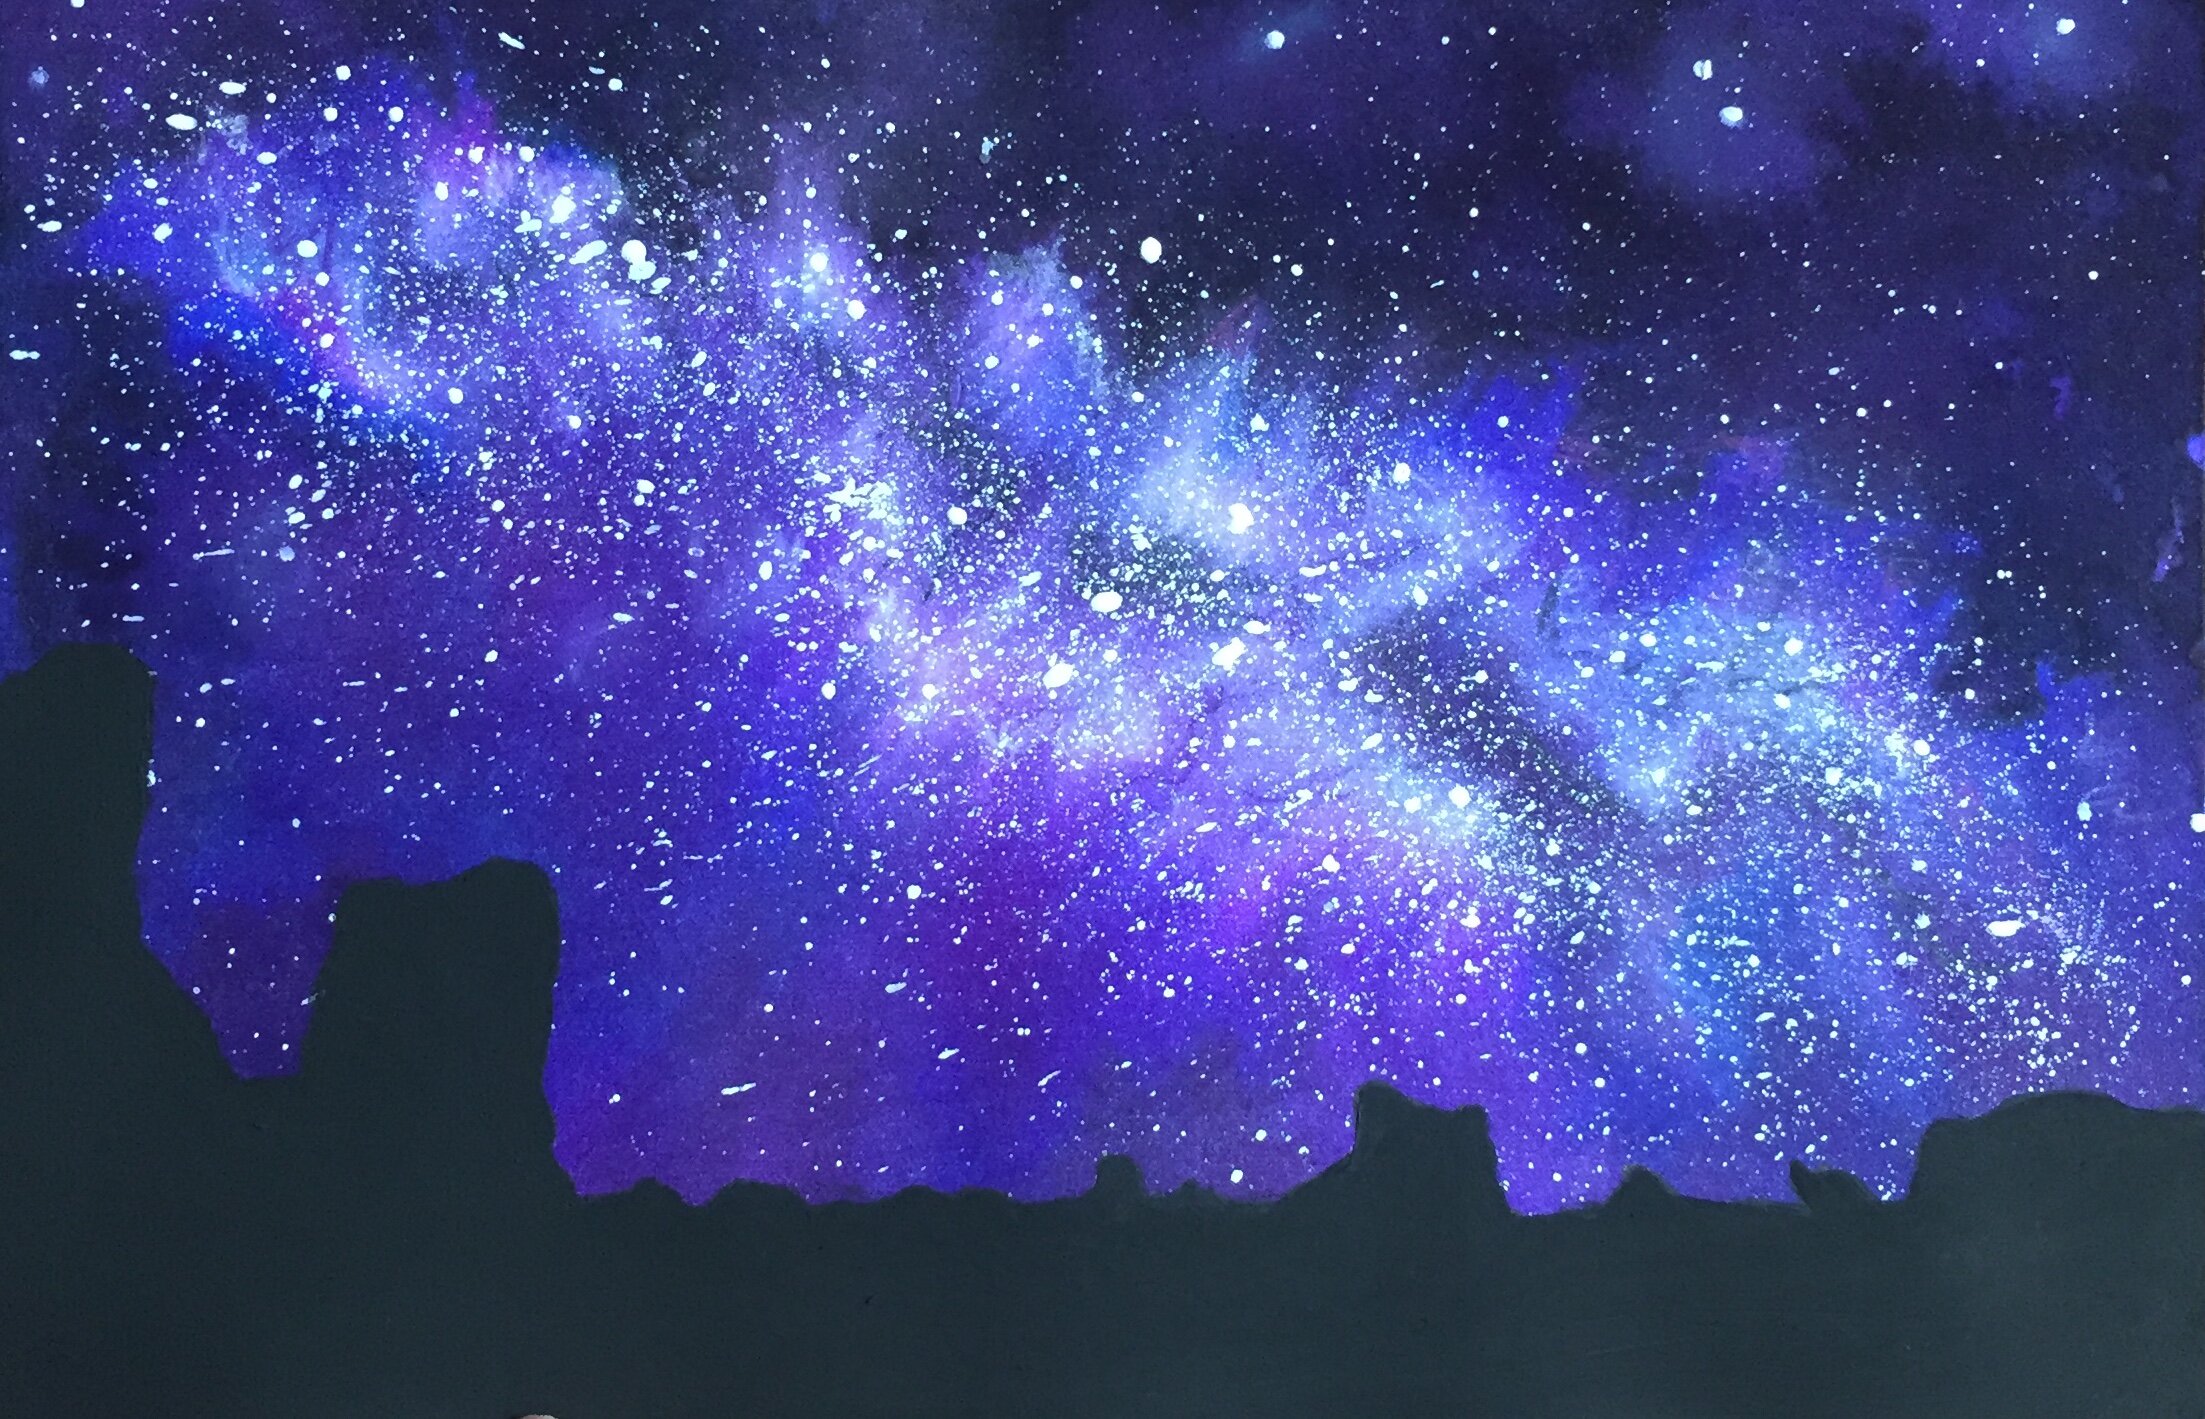 "milky way over moab" [watercolor]